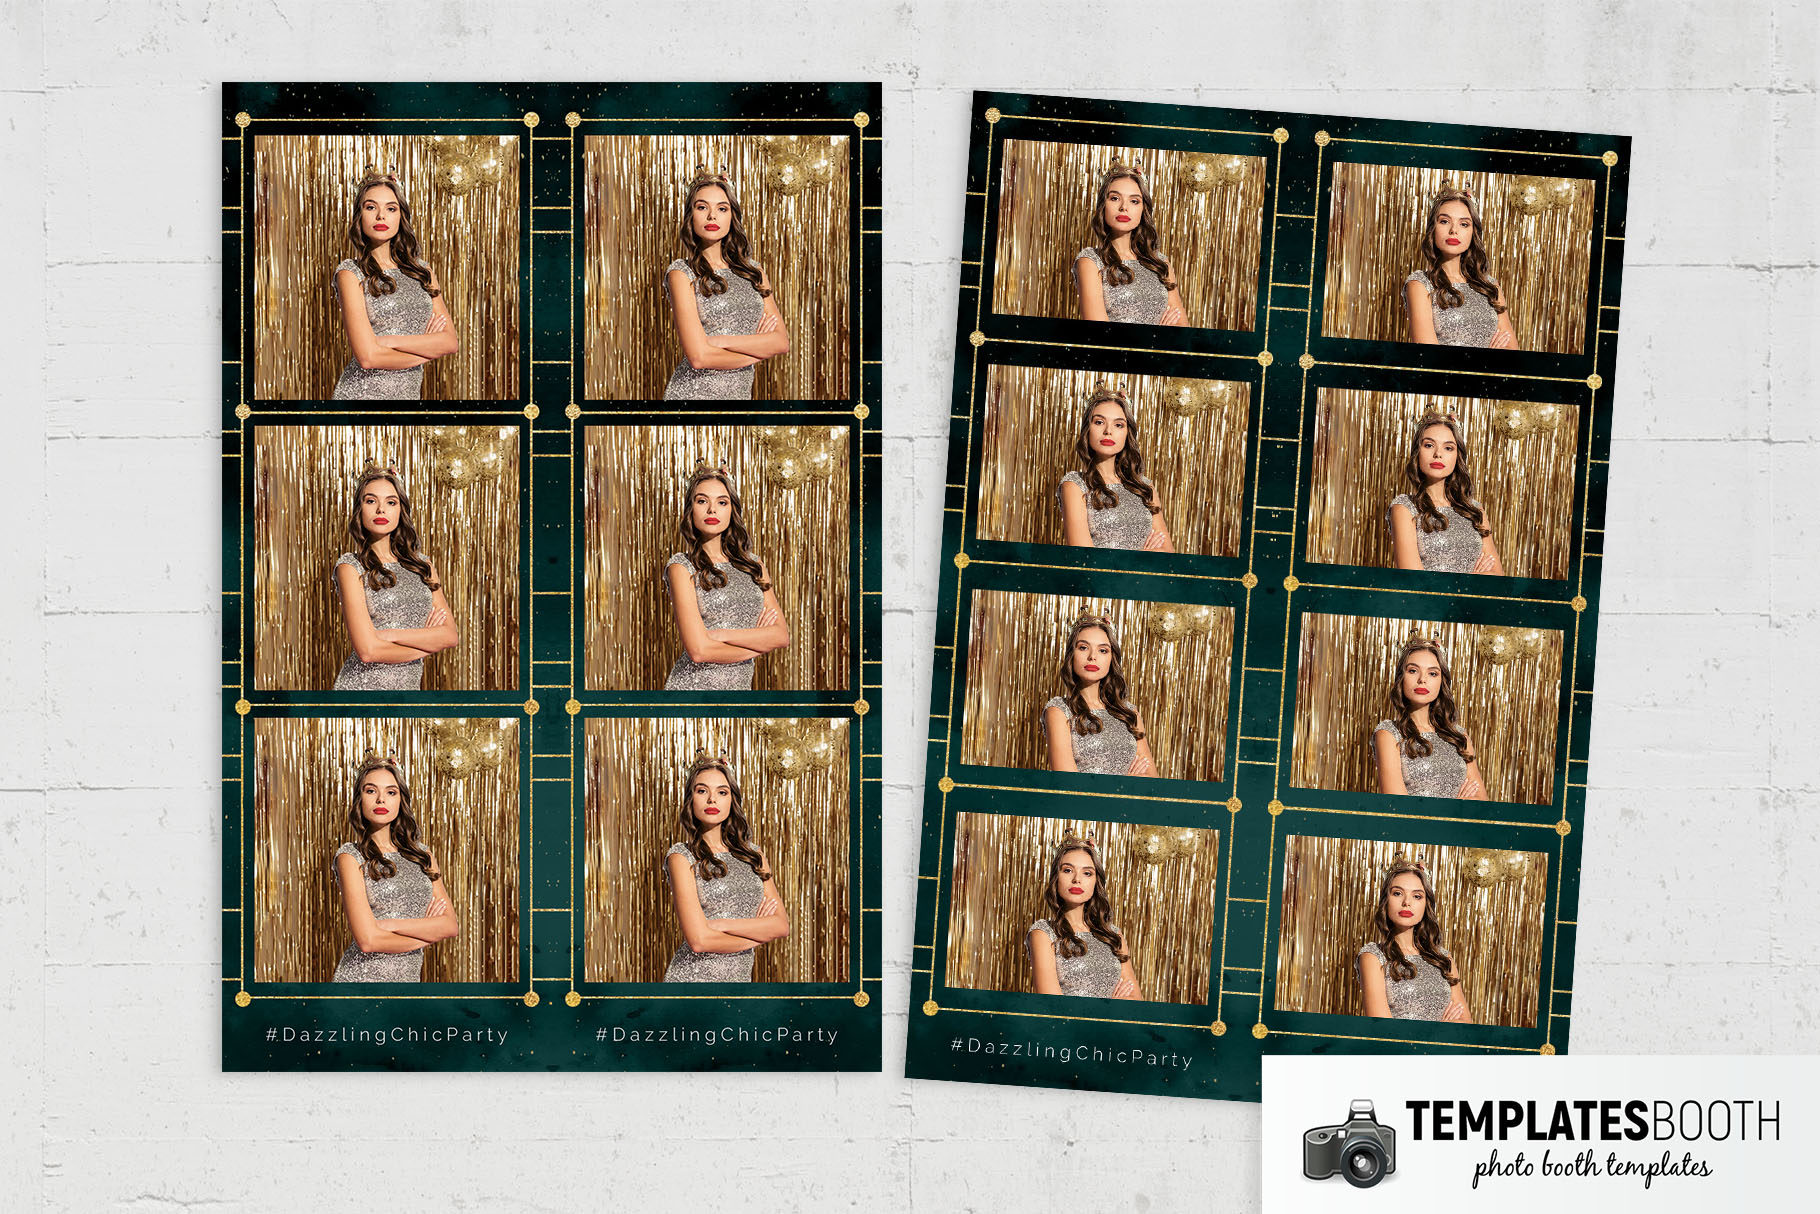 Free Prom Photo Booth Template